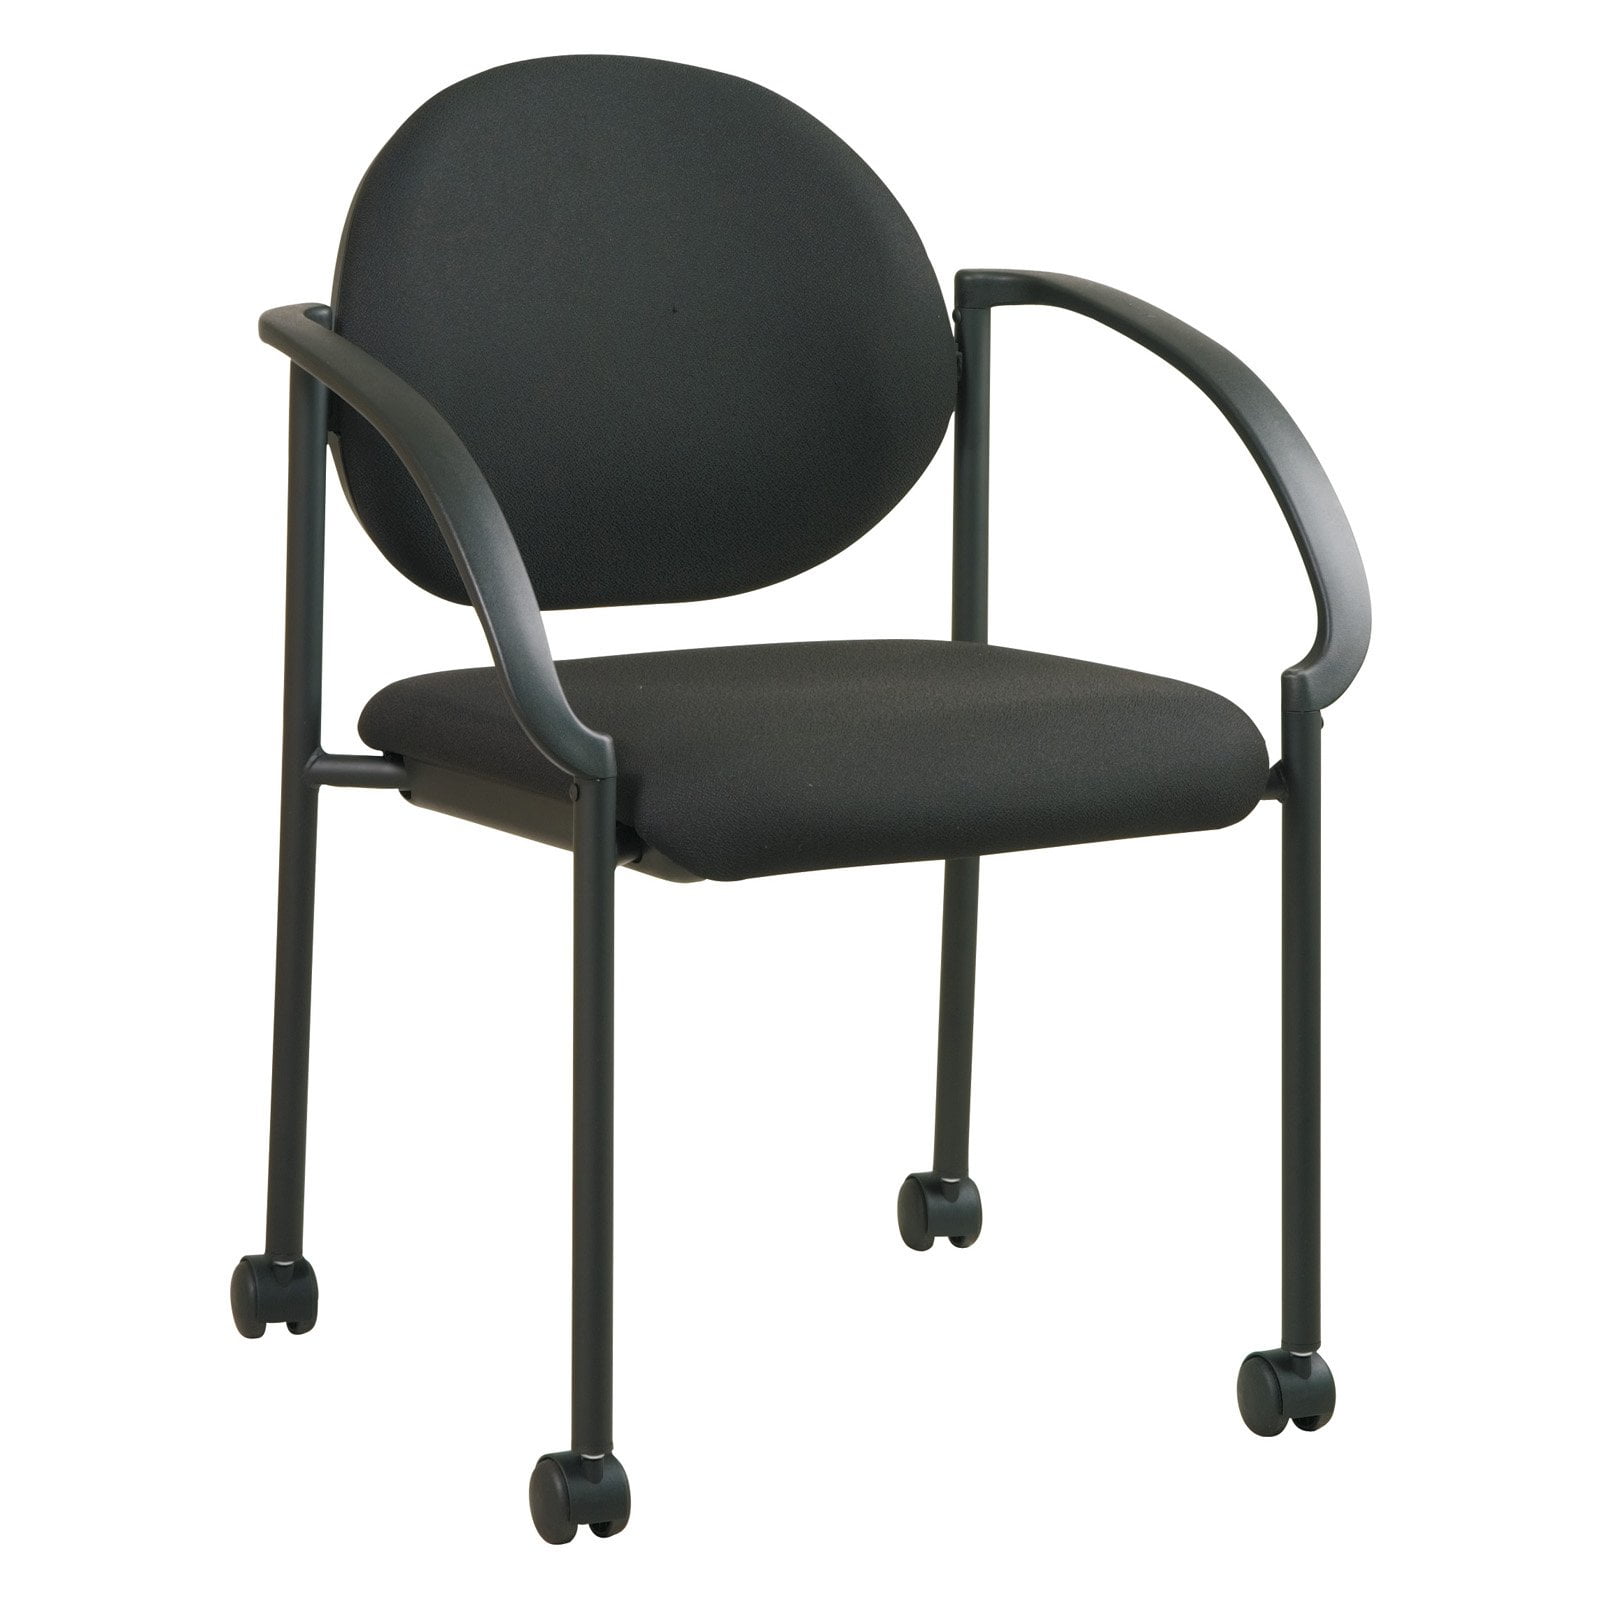 Black 3 Pack Stacking Chairs 24/7 Seating Heavy Duty Fabric Stackable Reception Office Chairs